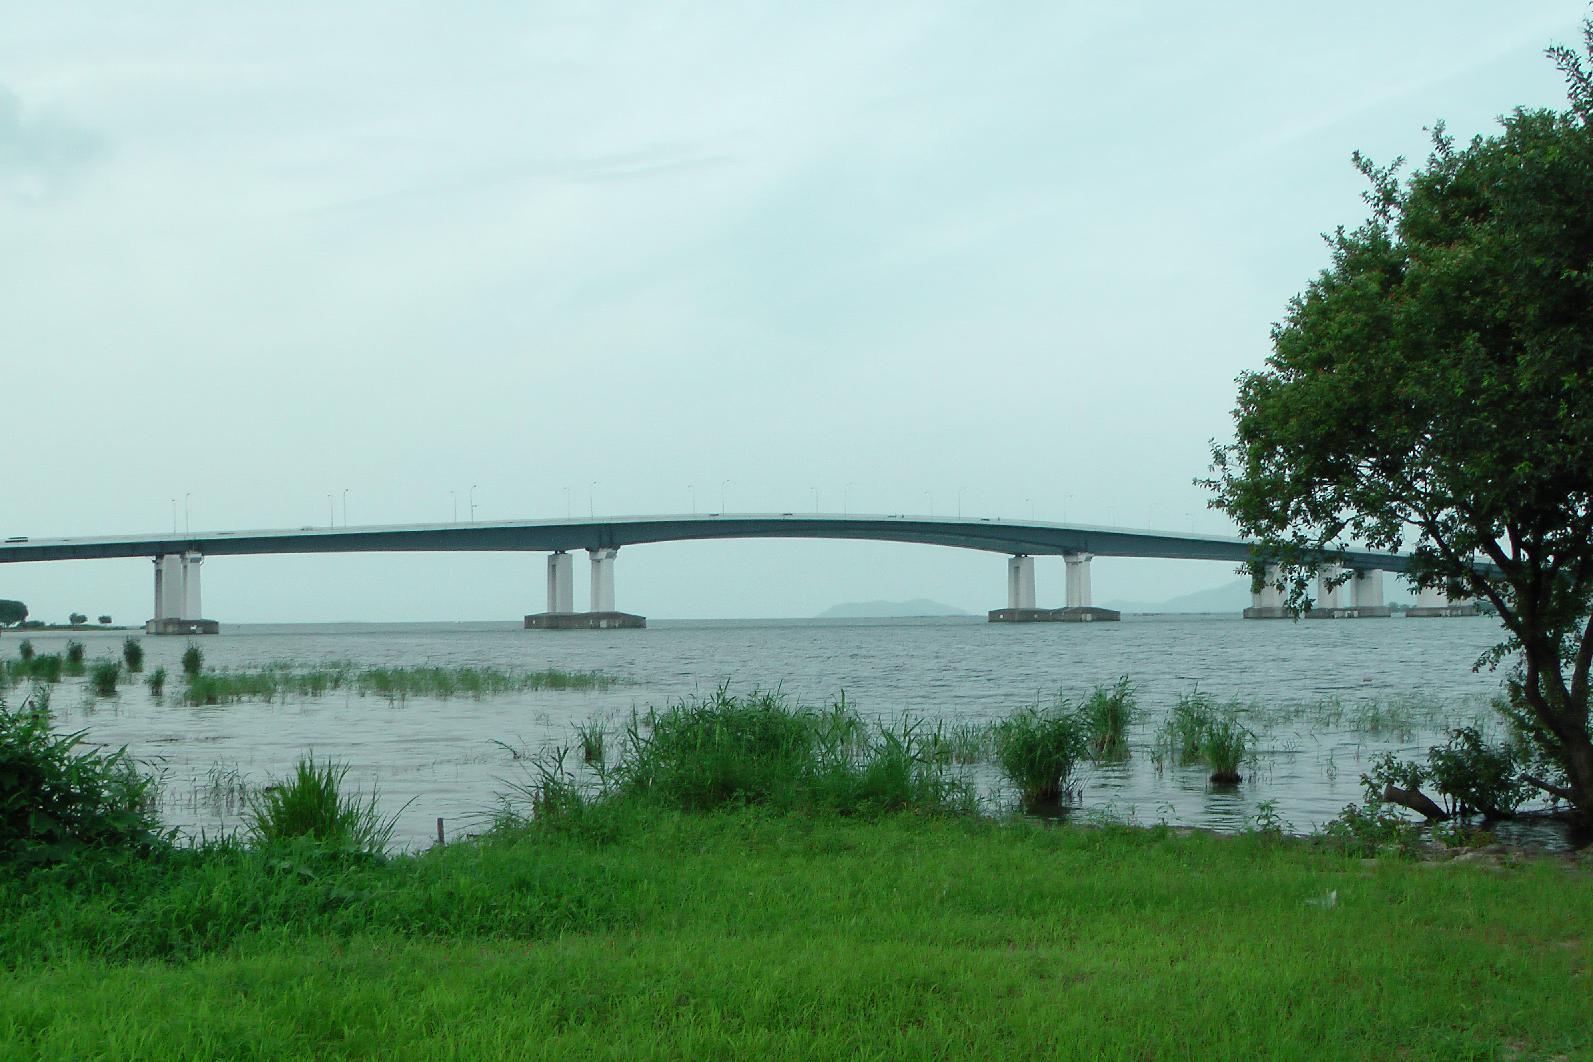 A bridge connects west and east side before the north part of the lake spreads out to a width of more than 20 km (12,4 miles)